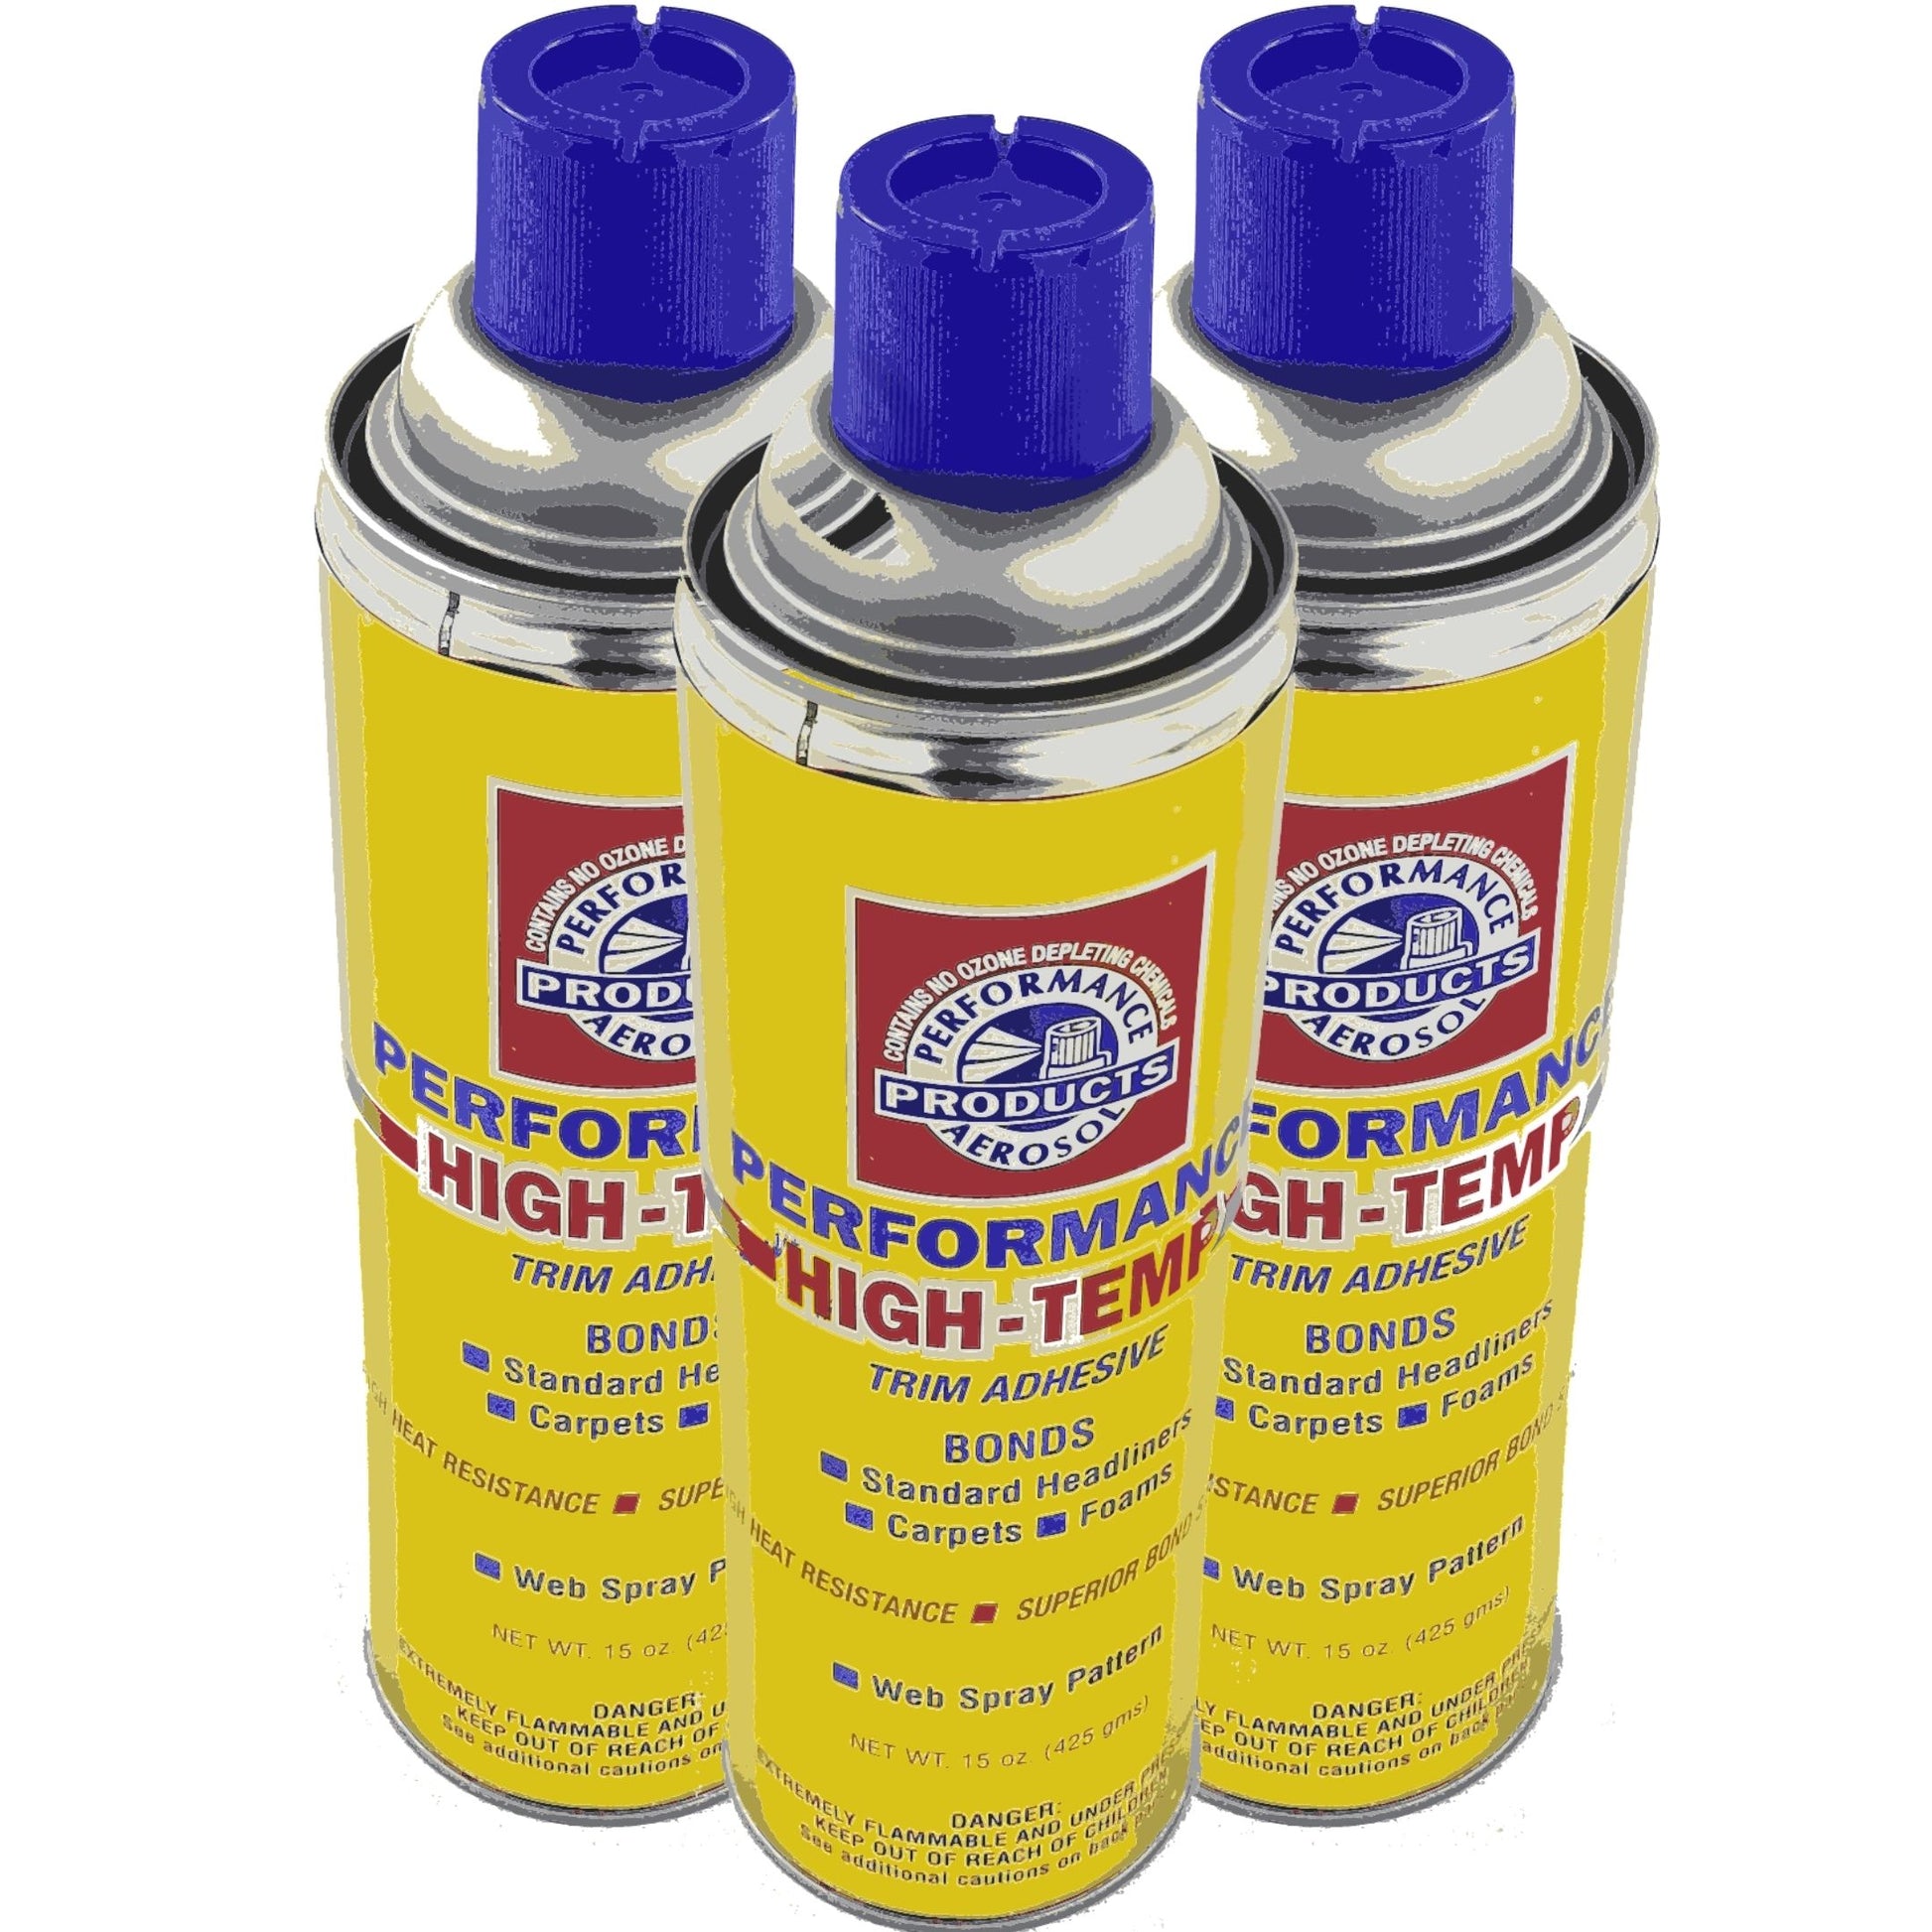 Qty 2 of Performance High Temp Headliner Spray Adhesive 12 Oz Cans